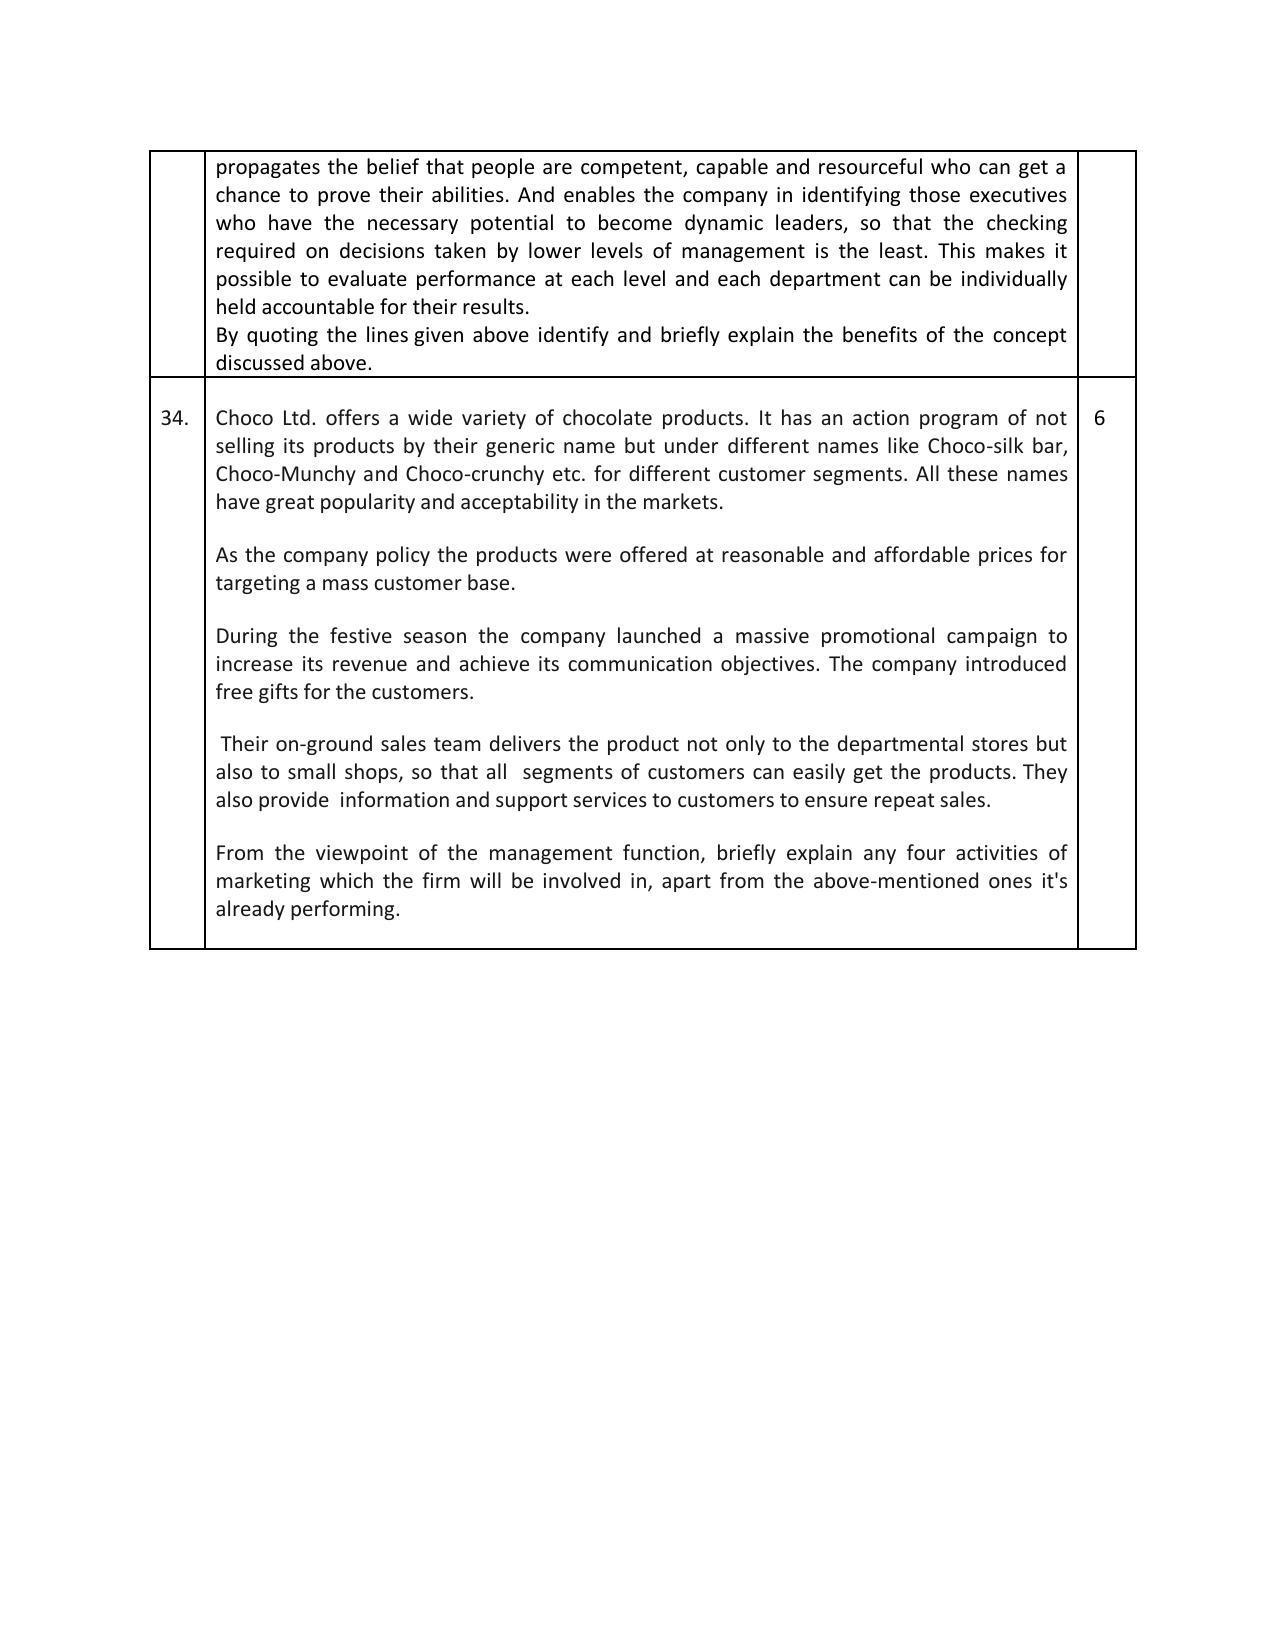 CBSE Class 12 Business Studies Sample Paper 2023 - Page 8